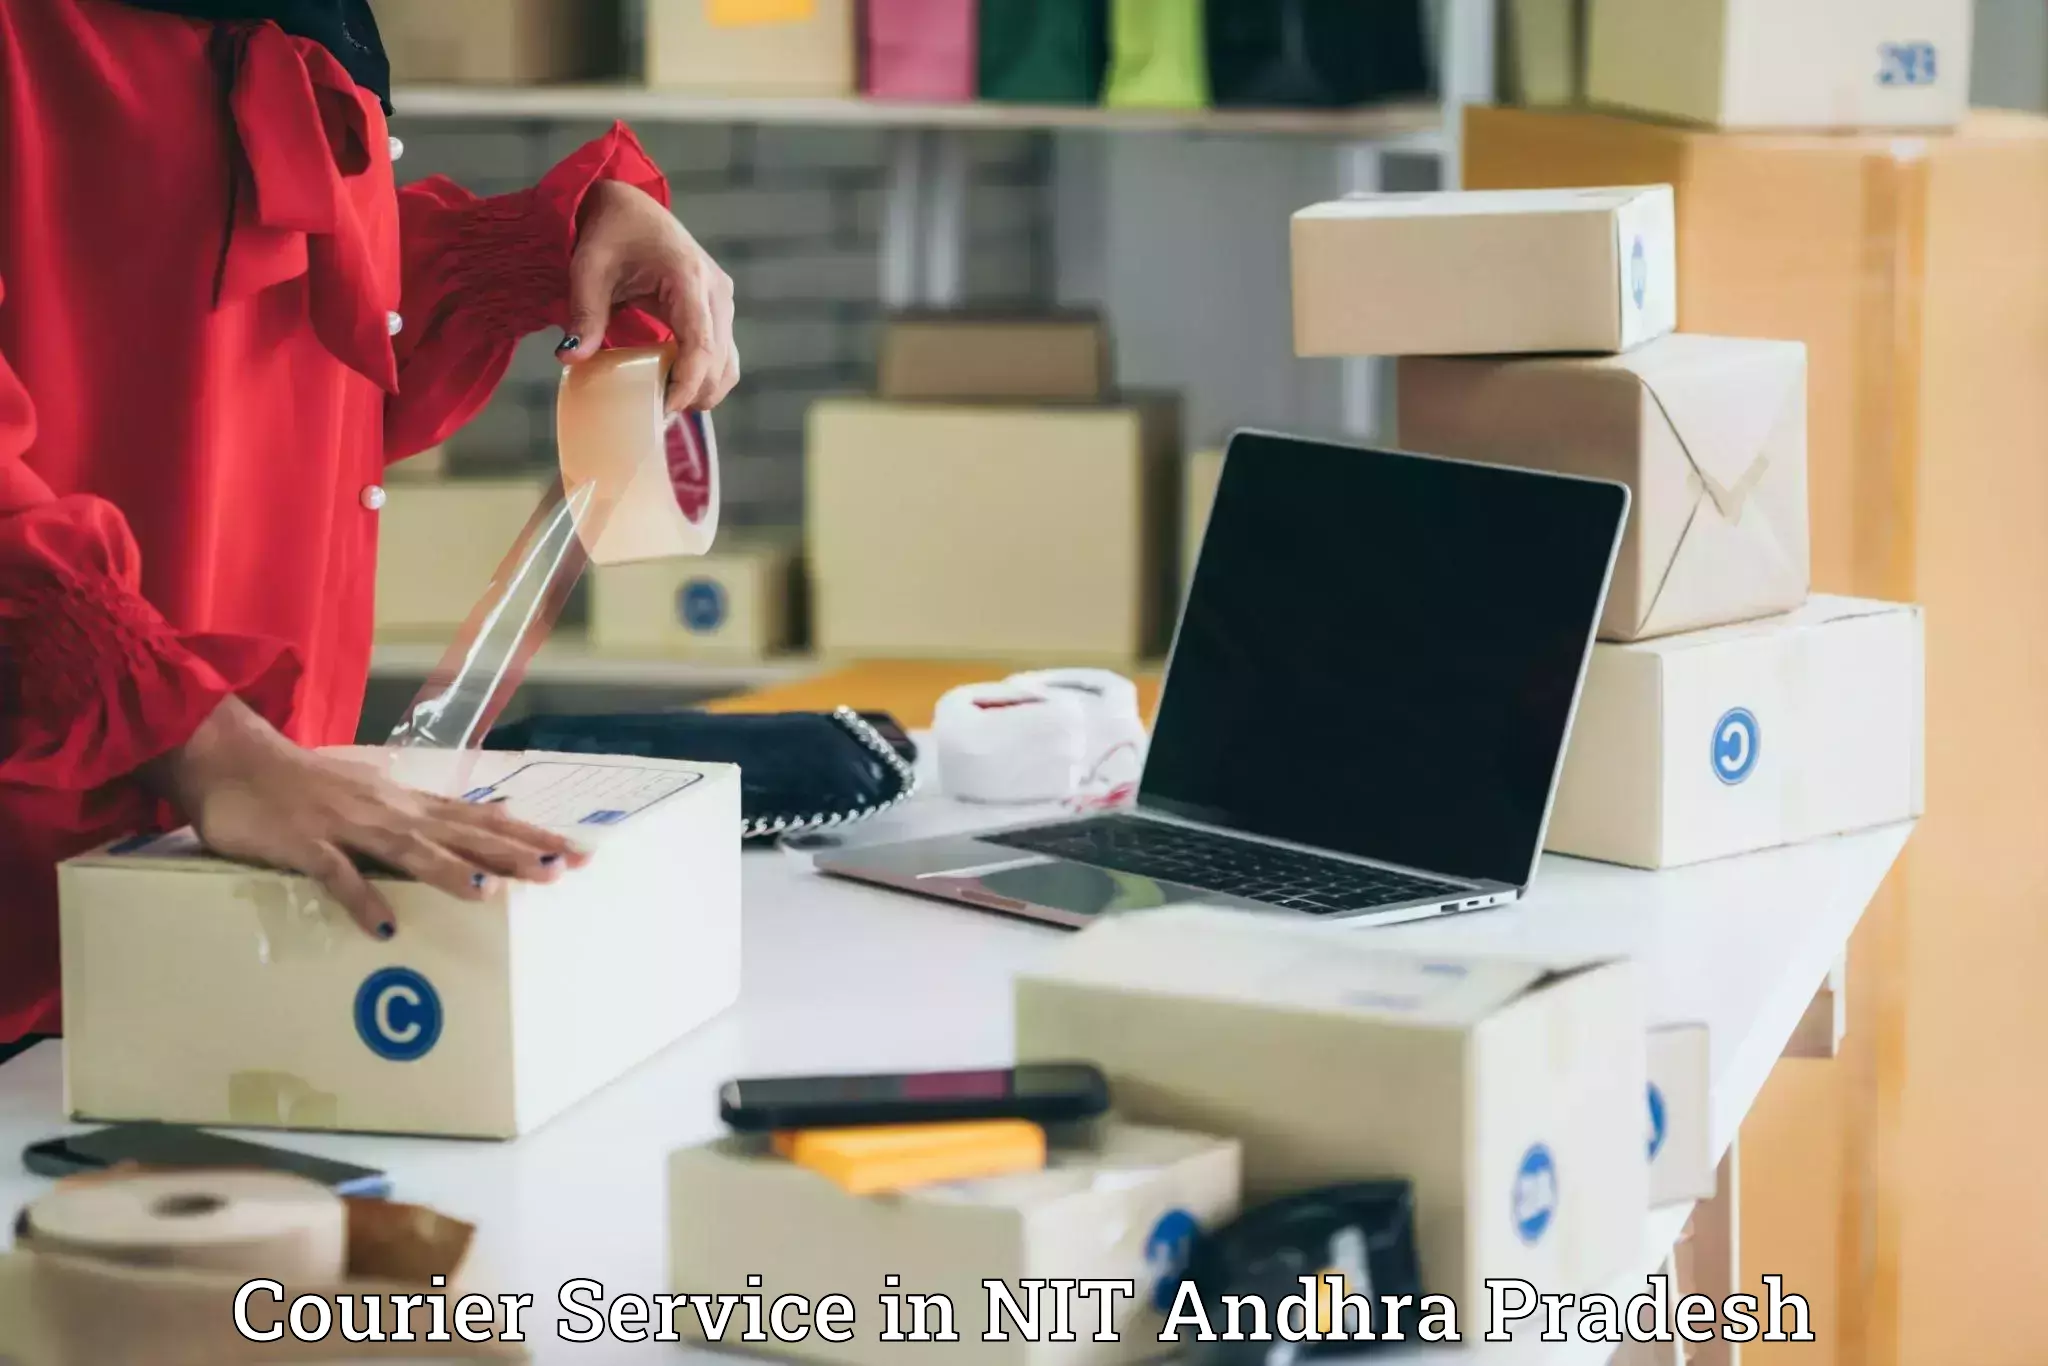 Full-service courier options in NIT Andhra Pradesh